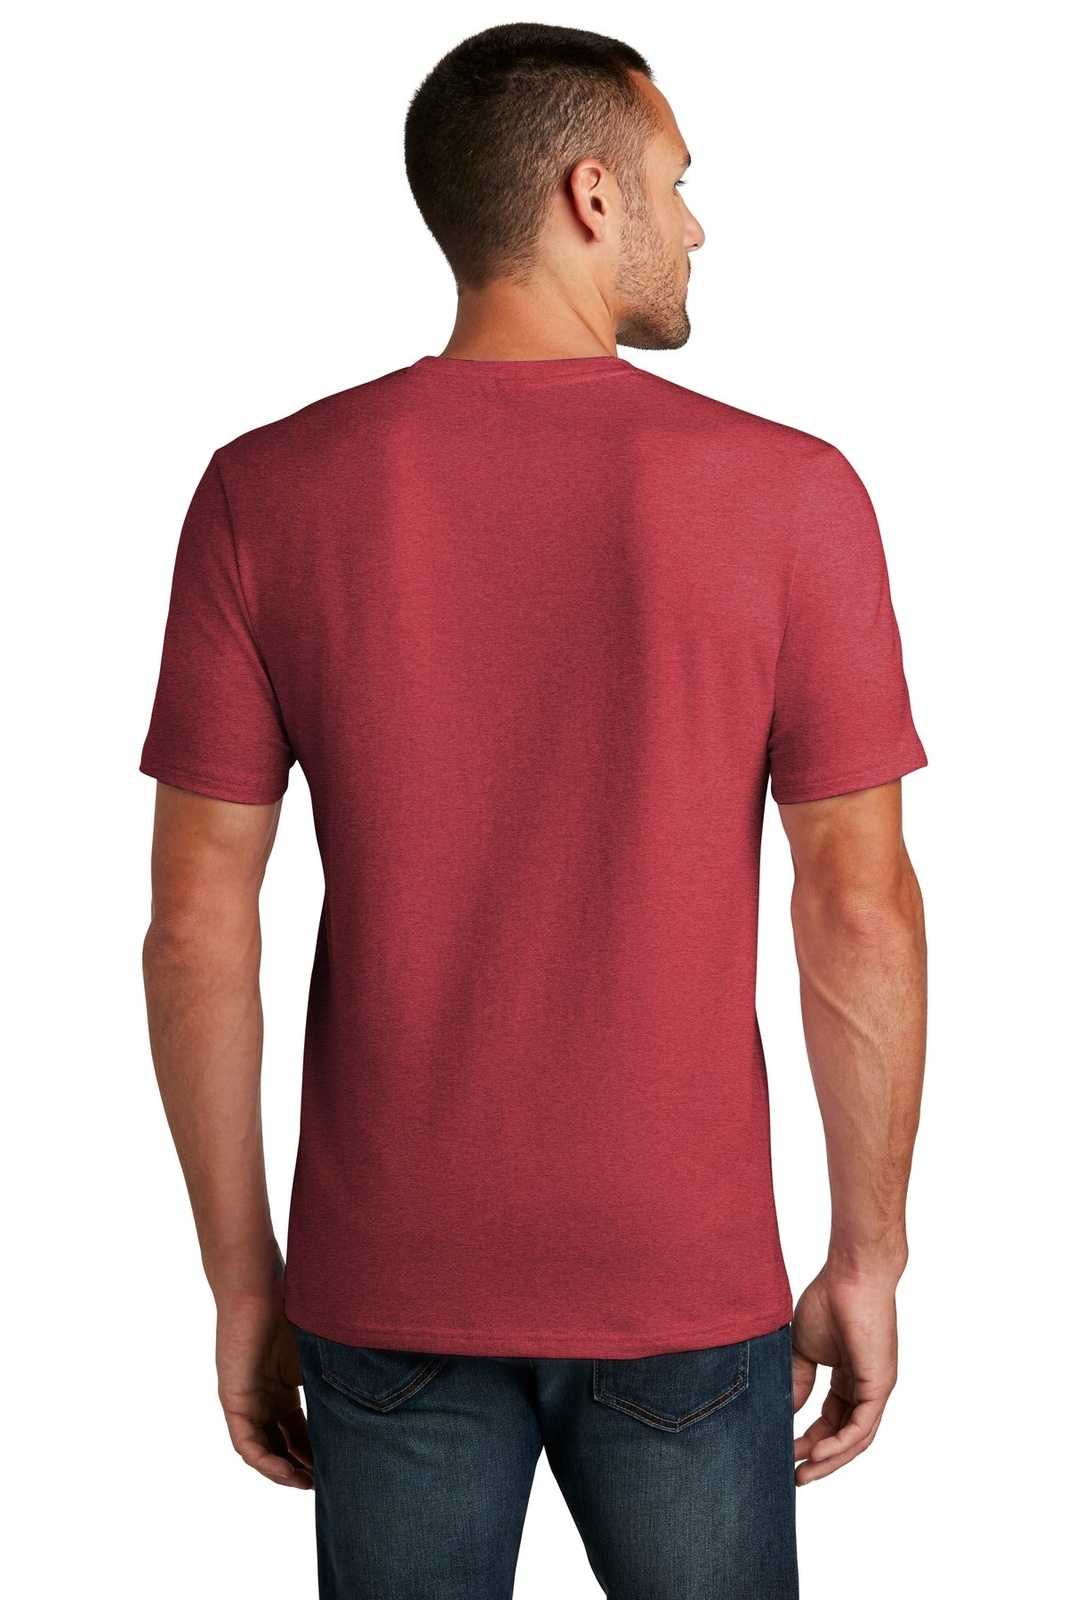 District DT7500 Flex Tee - Heathered Red - HIT a Double - 2